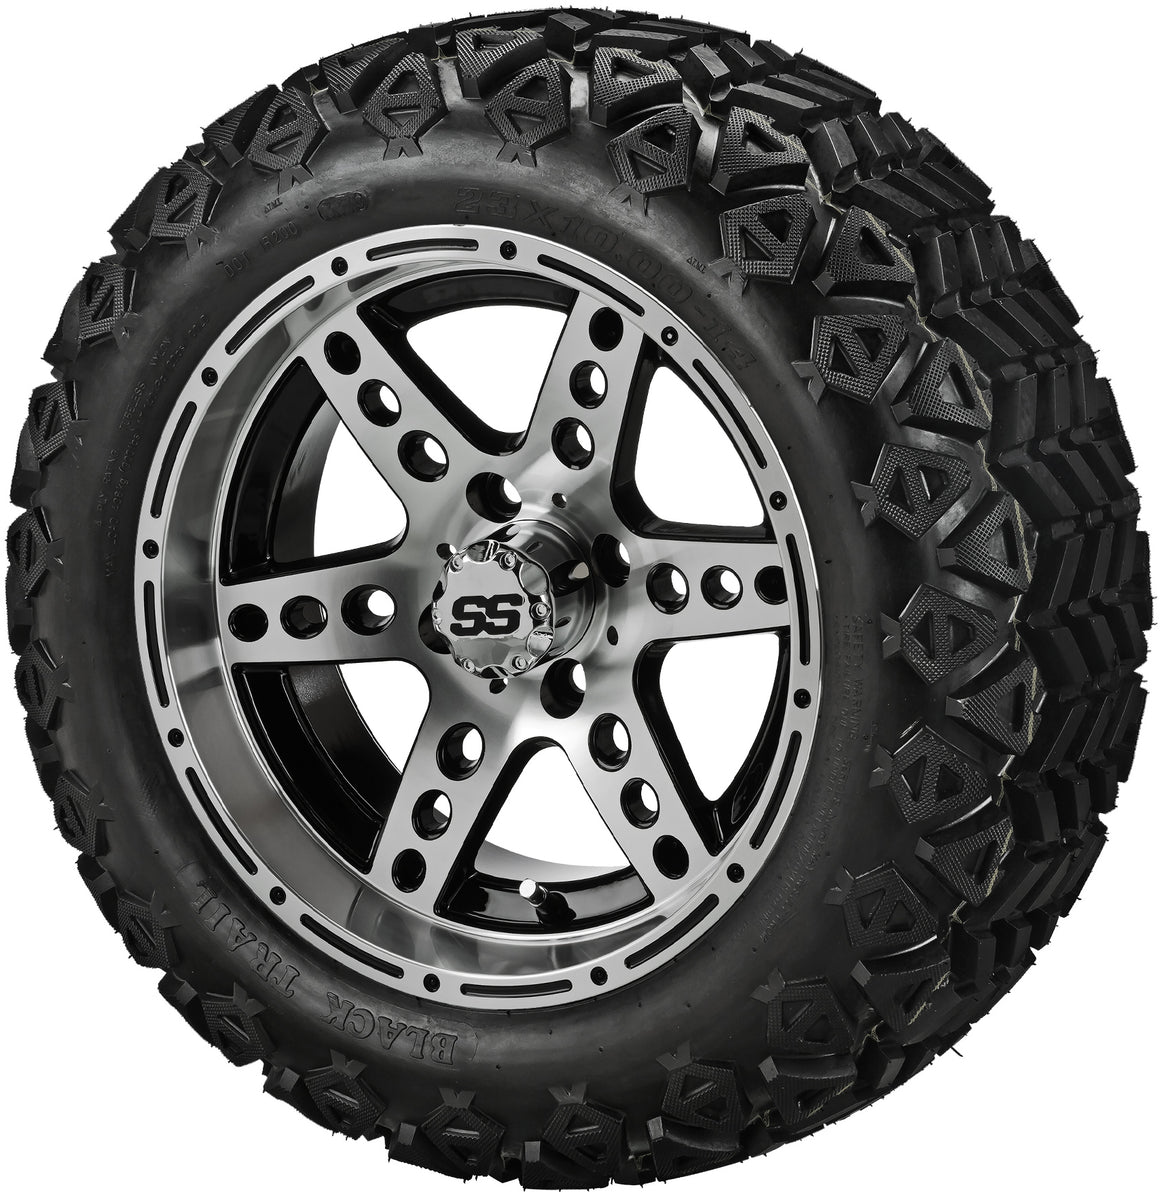 14" Chaos Wheels on 23x10.00-14 Black Trail Tires Combo